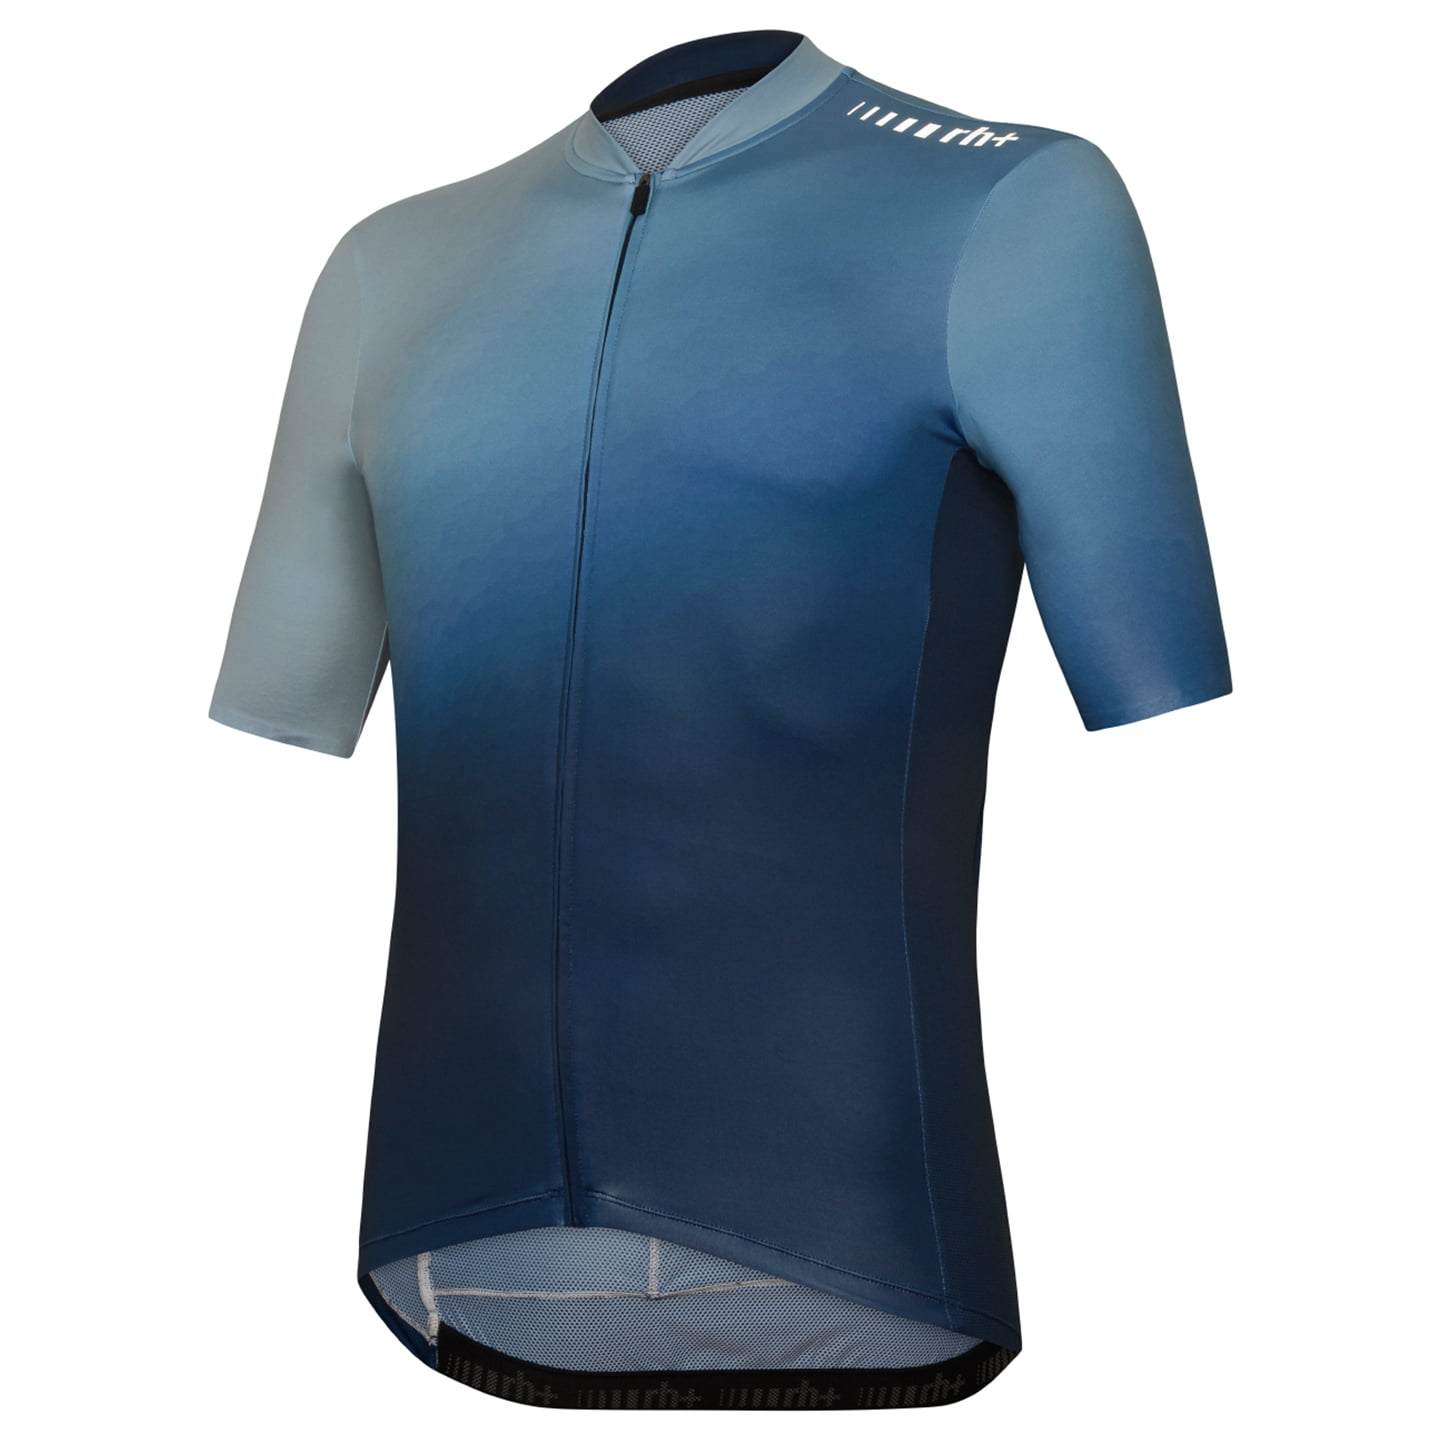 rh+ Magnus Short Sleeve Jersey Short Sleeve Jersey, for men, size 2XL, Cycling jersey, Cycle clothing